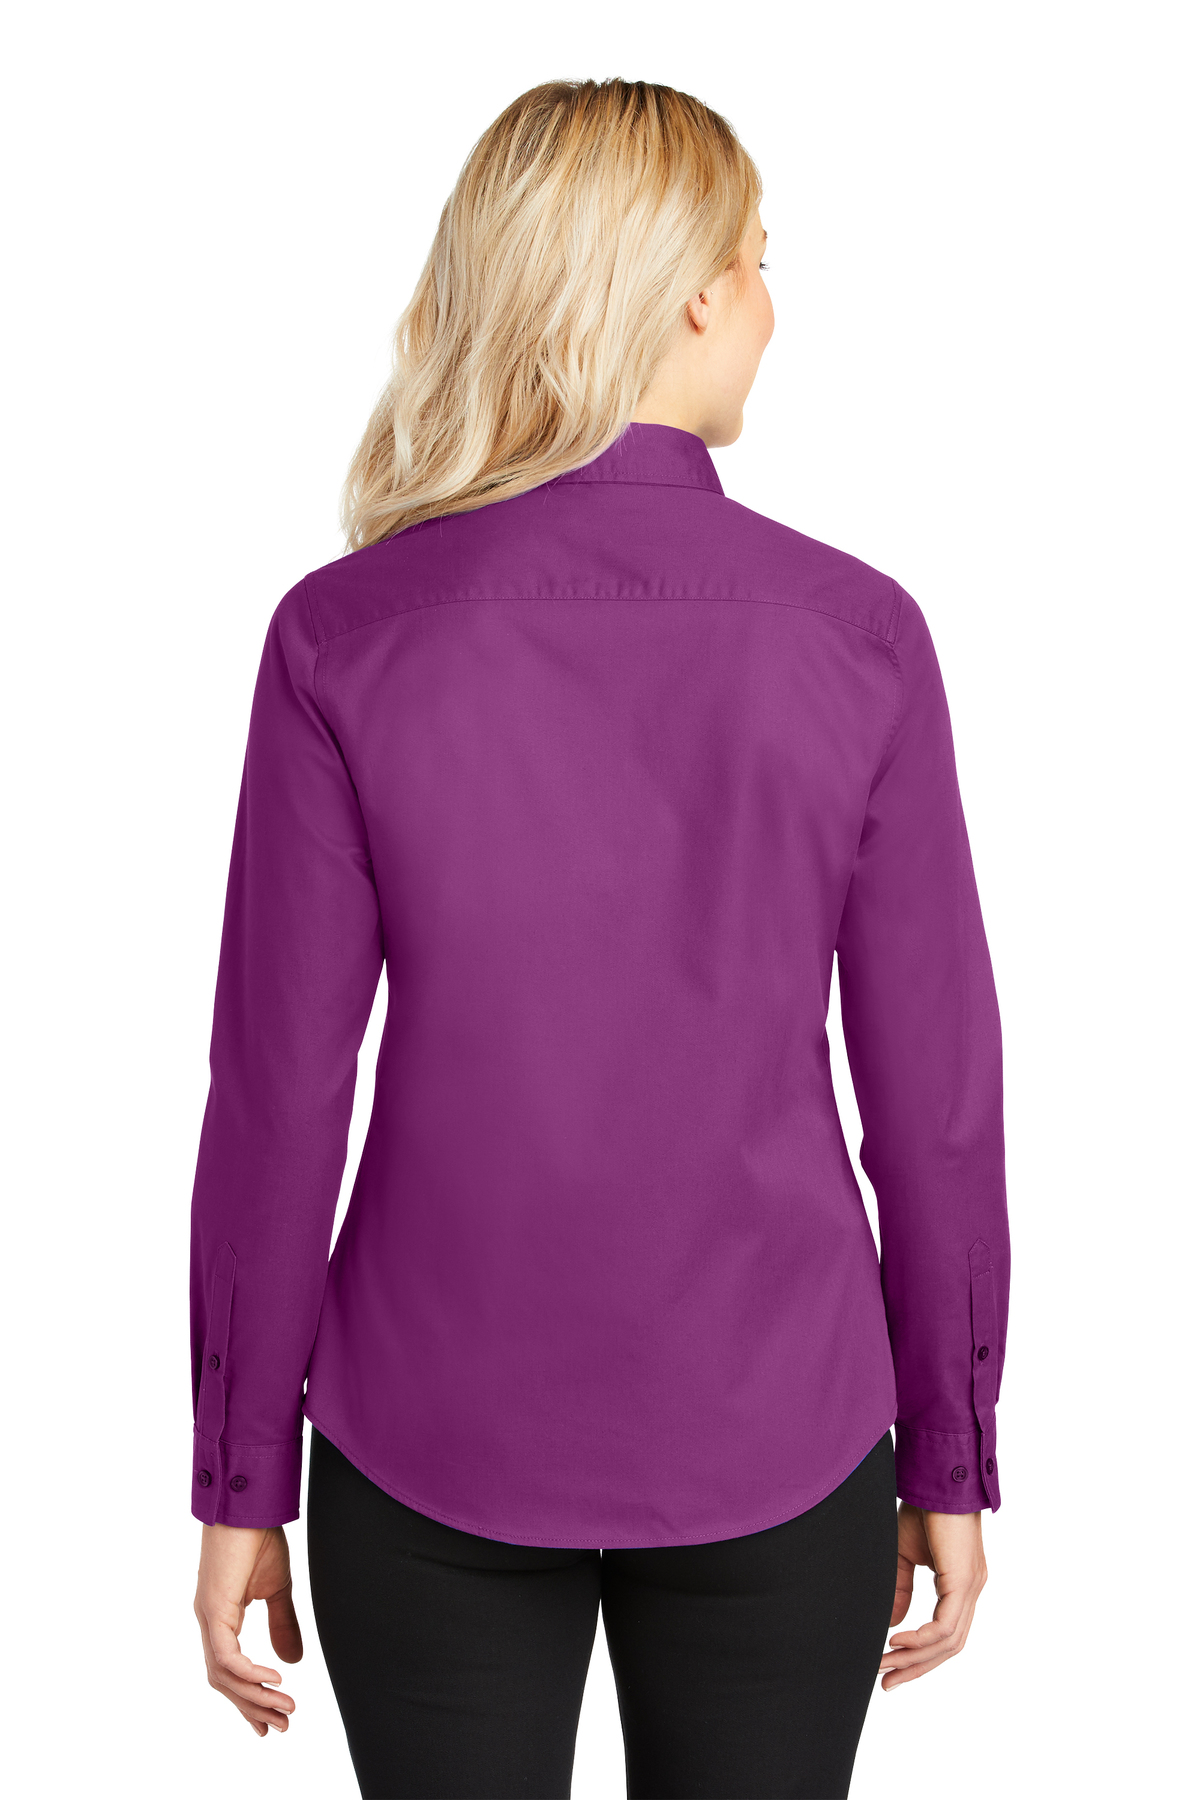 Sleeve Shirt Product | Port Ladies Port Long Easy Authority Care | Authority